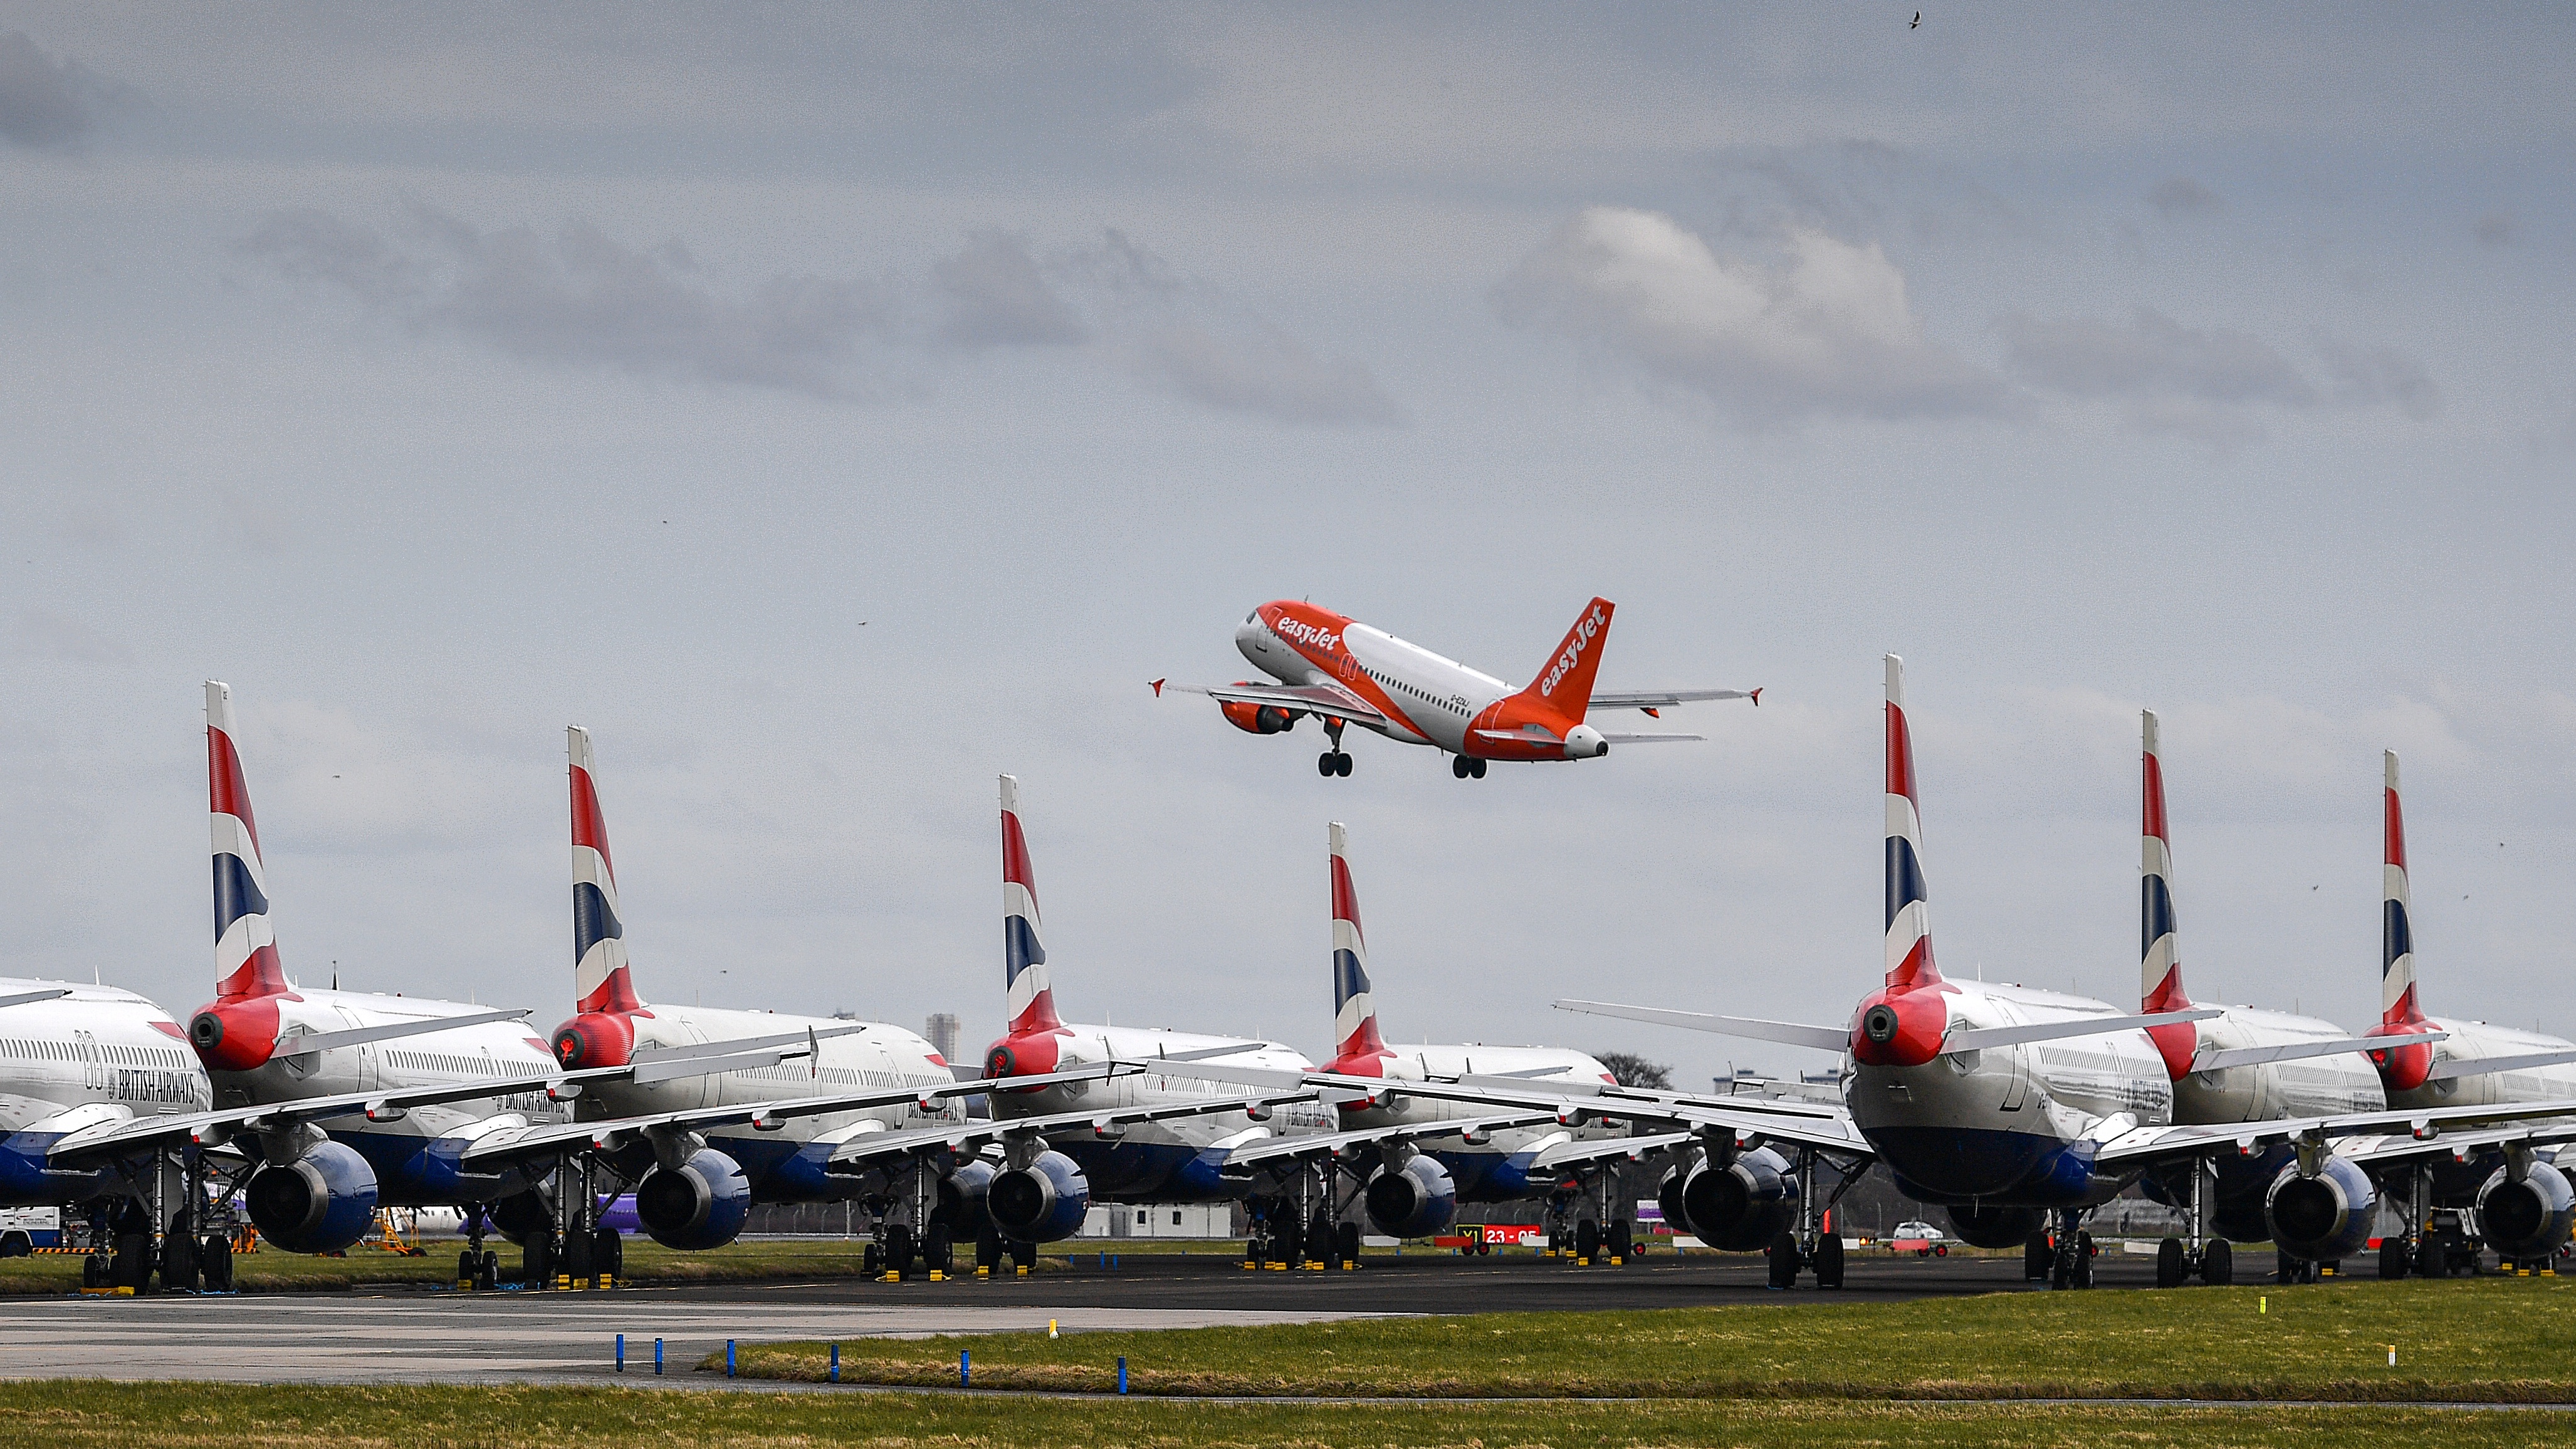 A fleet of British Airway planes sit on the runway at Glasgow Airport as an EasyJet plane takes off.